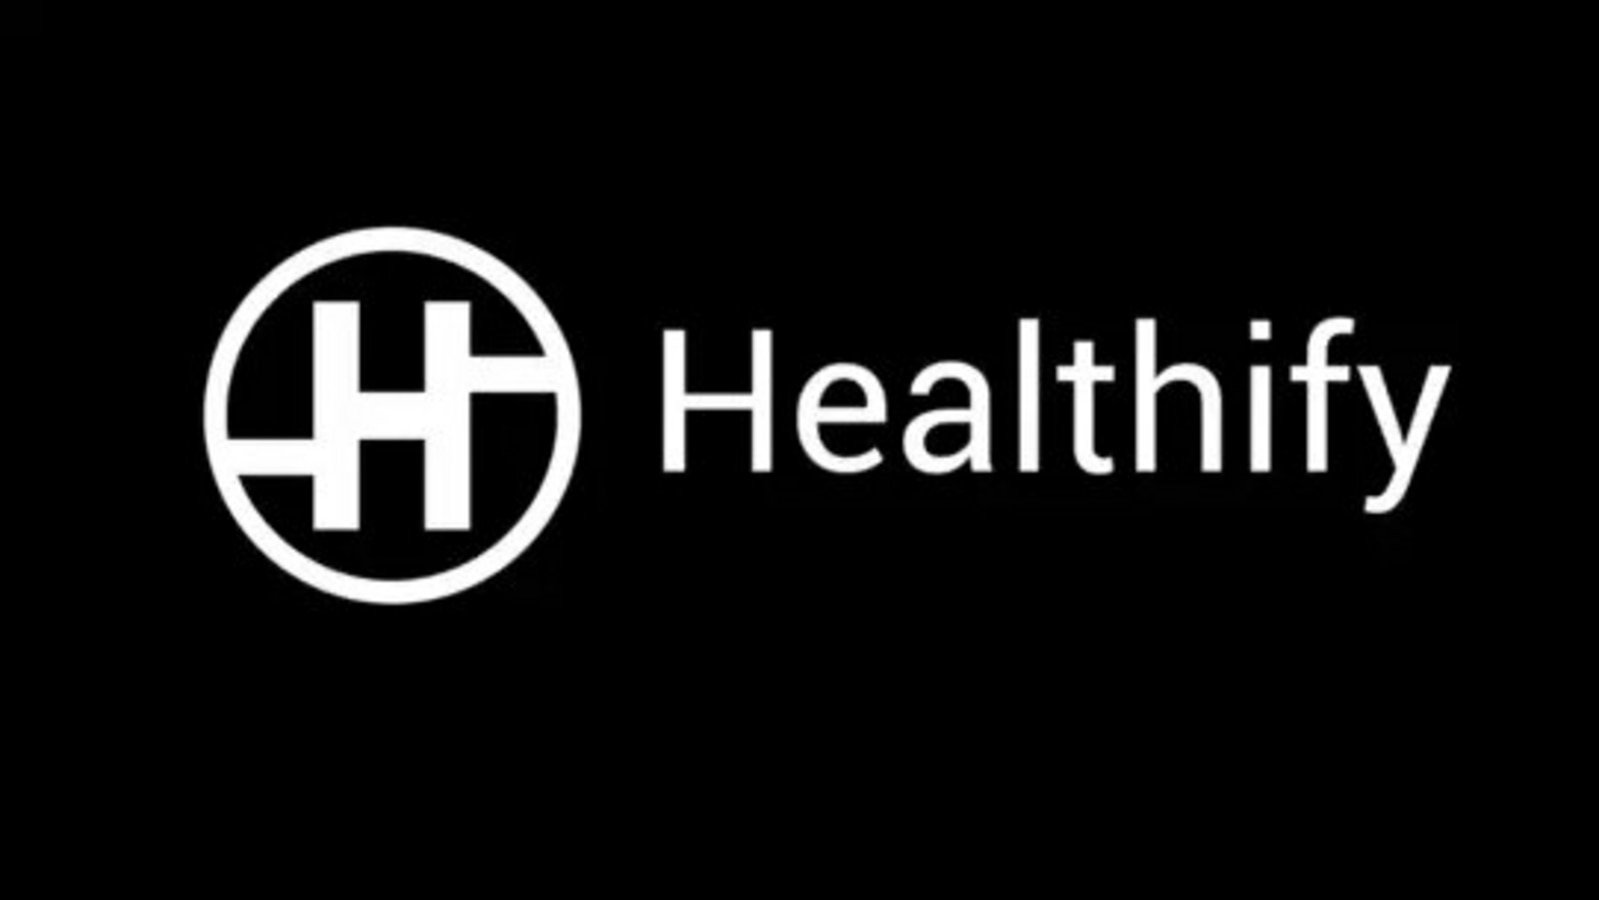 Healthify lays off 150 employees to make India business profitable